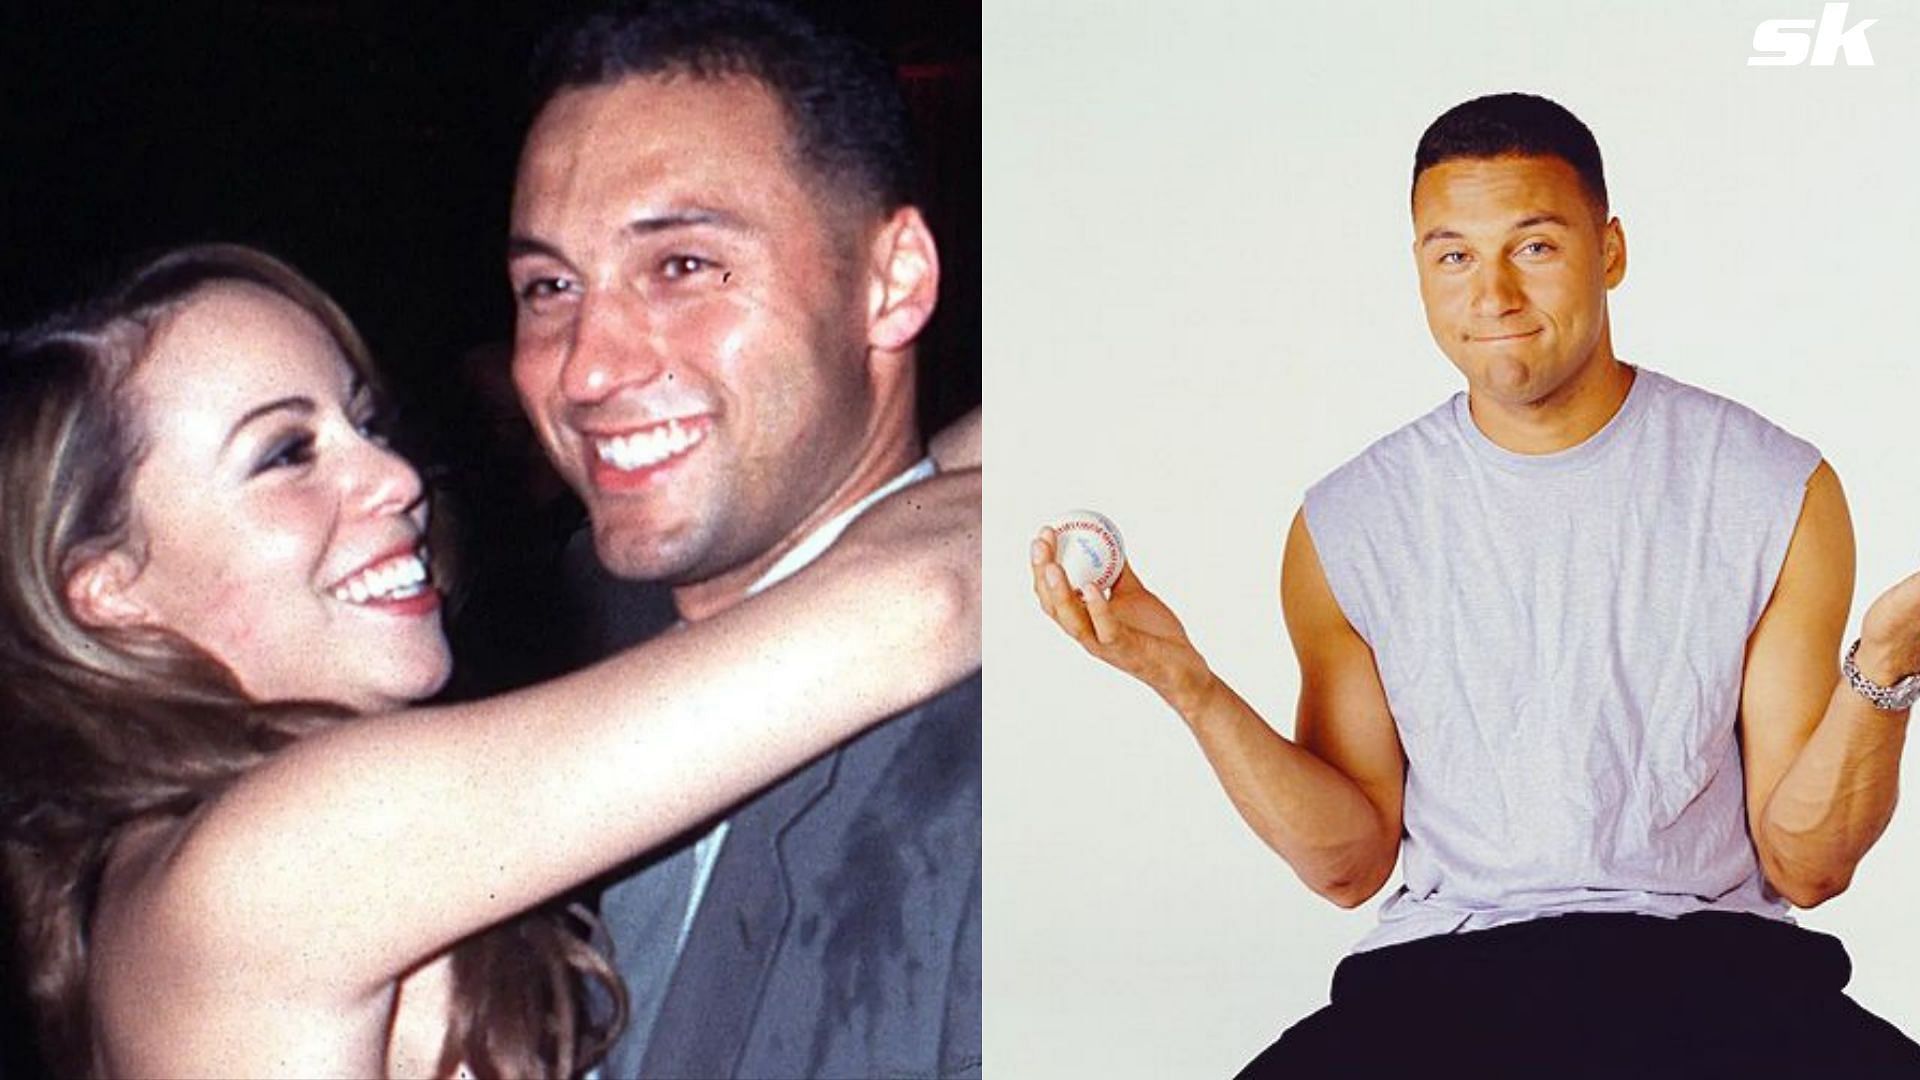 Derek Jeter on Mariah Carey in 1999: Going out with Mariah, that's taking  it to a whole other level